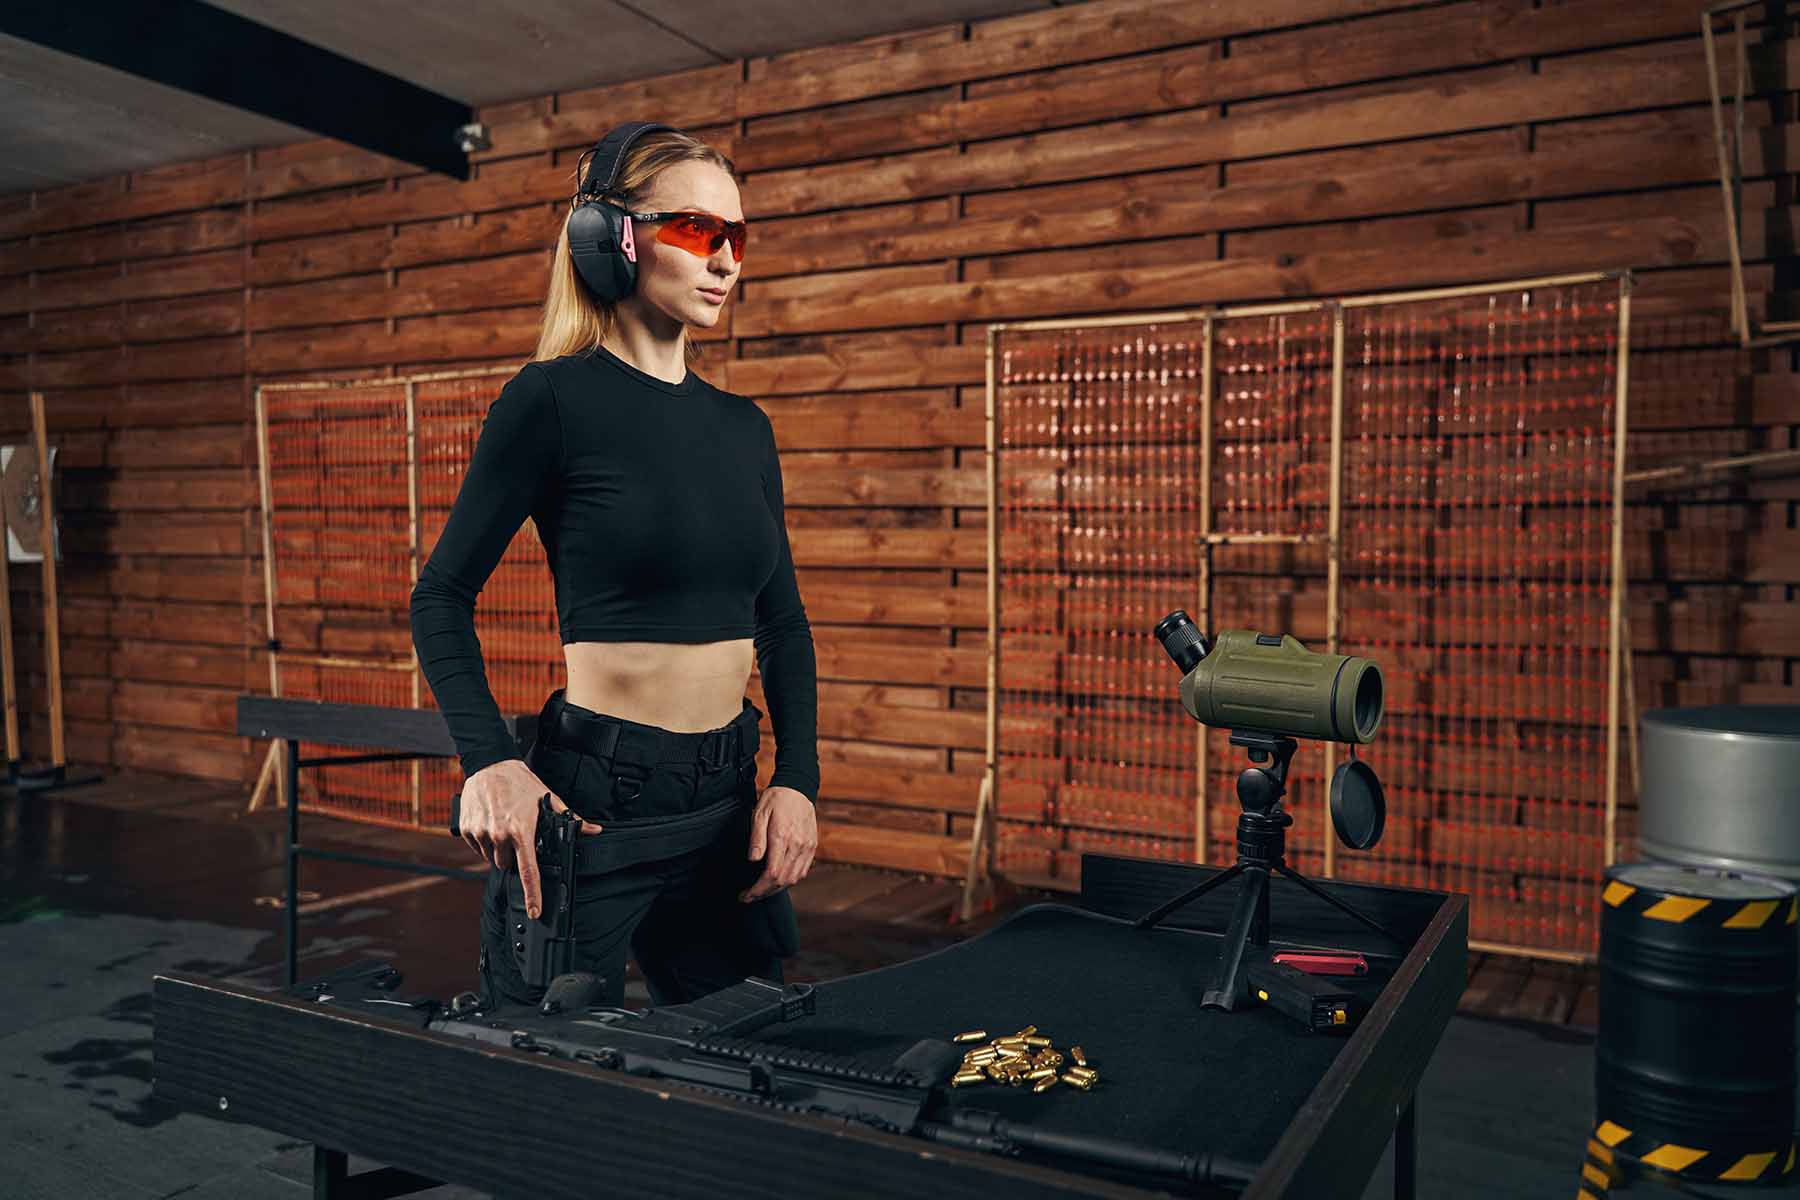 A woman is preparing herself before shooting targets at a shooting club.